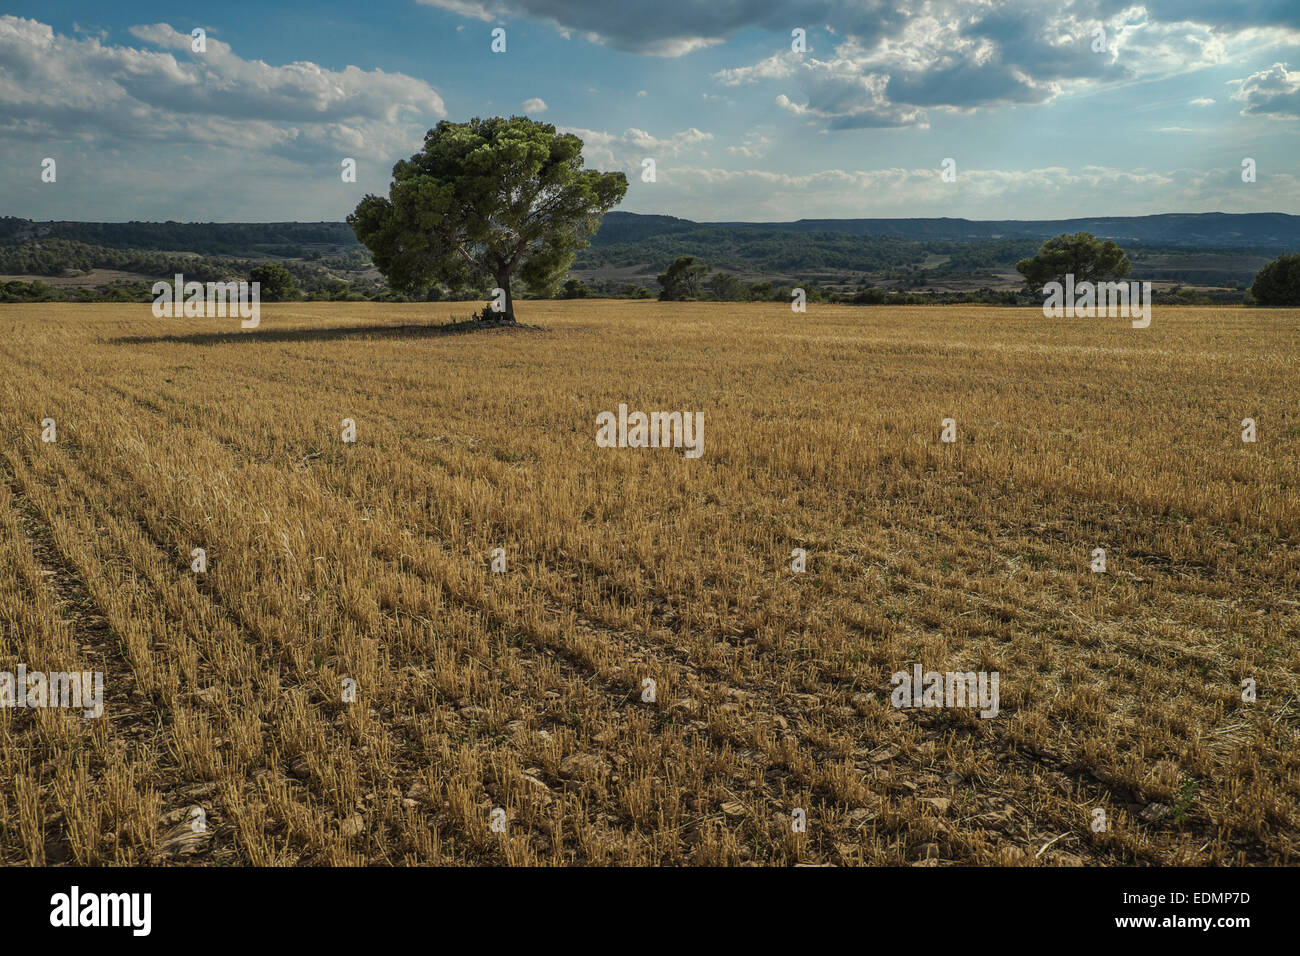 Tree and Cereal field on summertime at Monegros landscape, Aragón, Spain Stock Photo